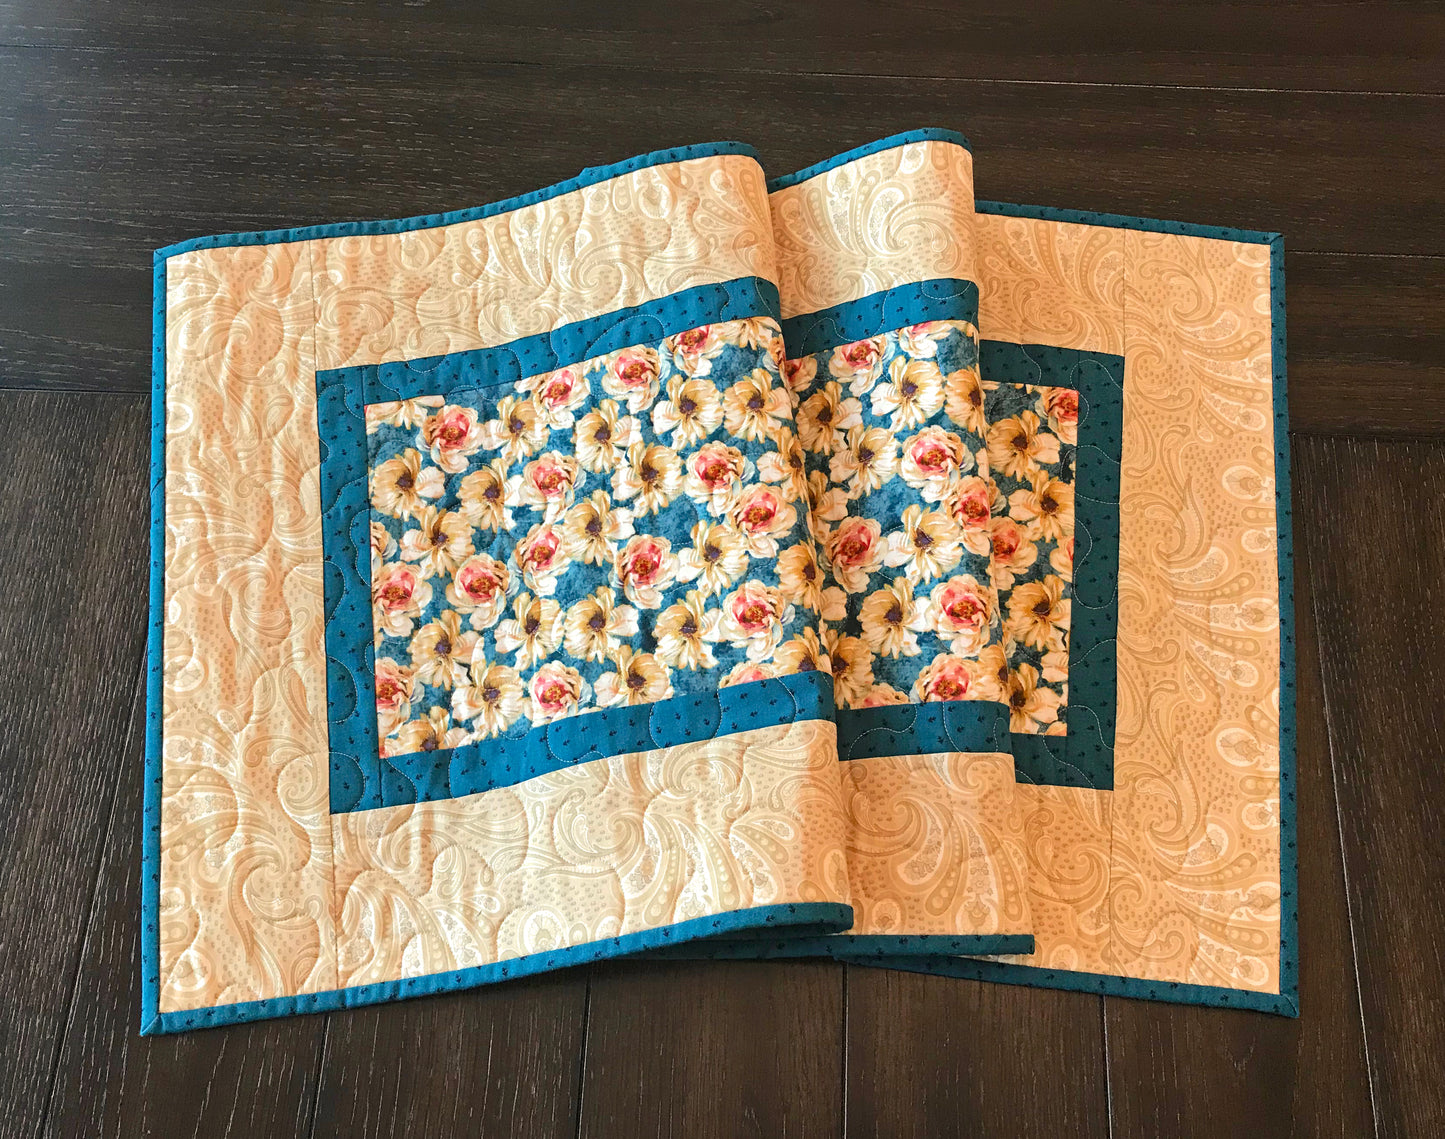 Teal and Cream Floral Table Runner - Handmade Quilts, Digital Patterns, and Home Décor items online - Cuddle Cat Quiltworks